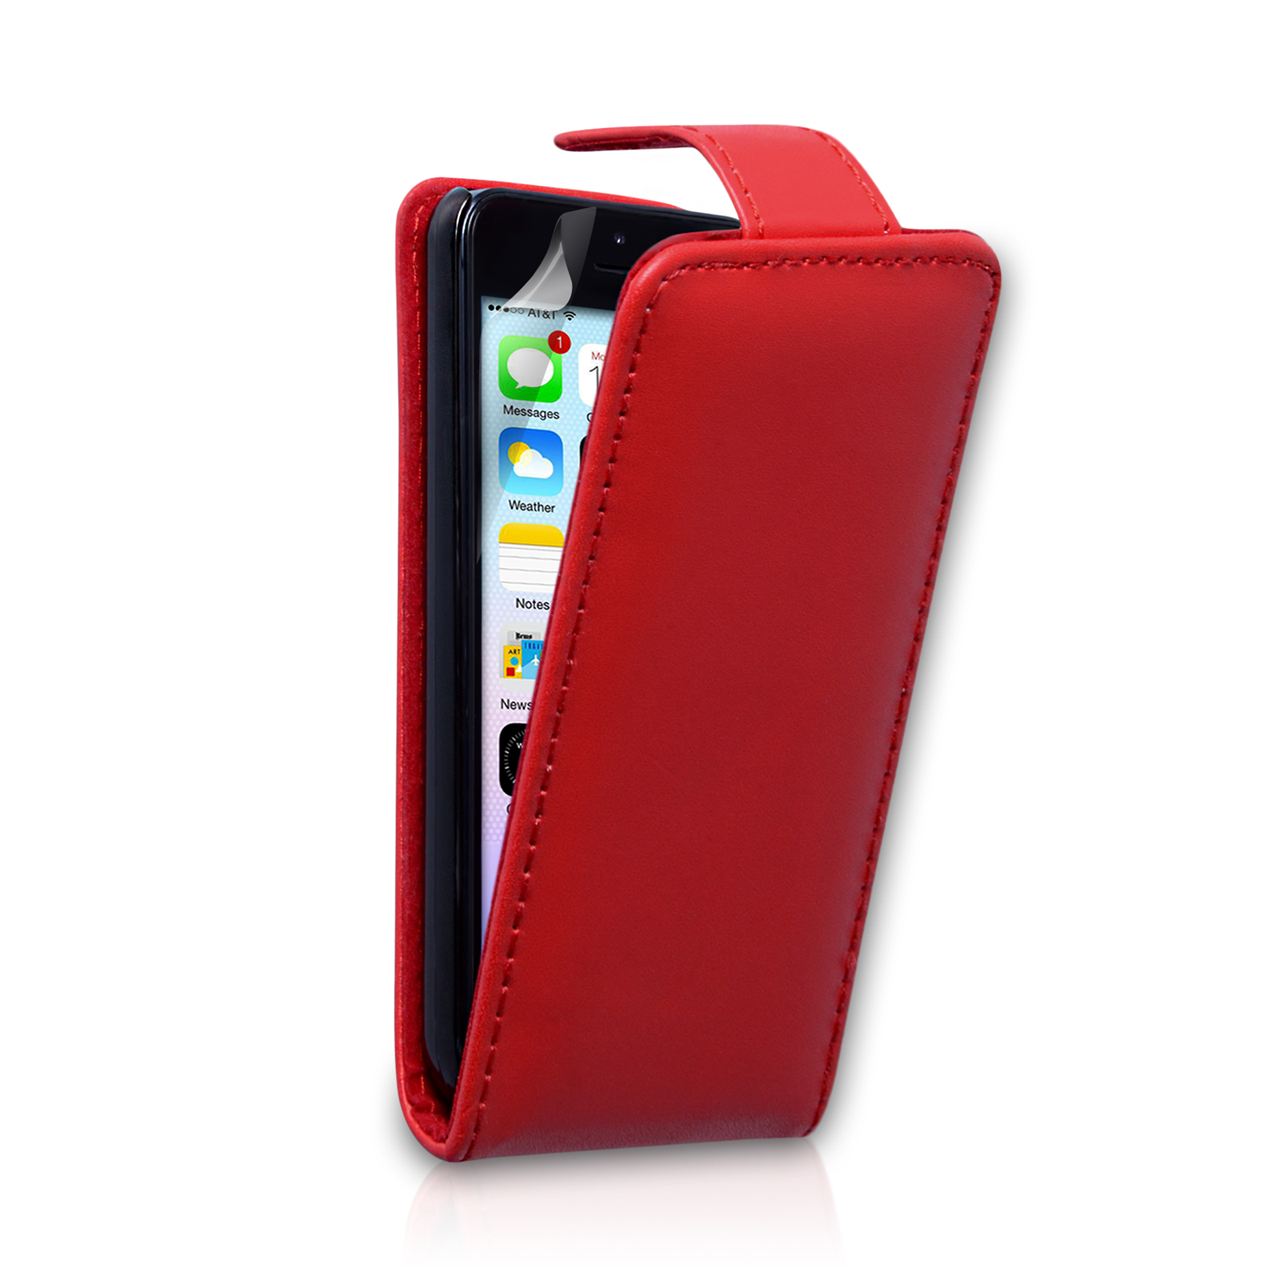 YouSave Accessories iPhone 5C Leather Effect Flip Case - Red